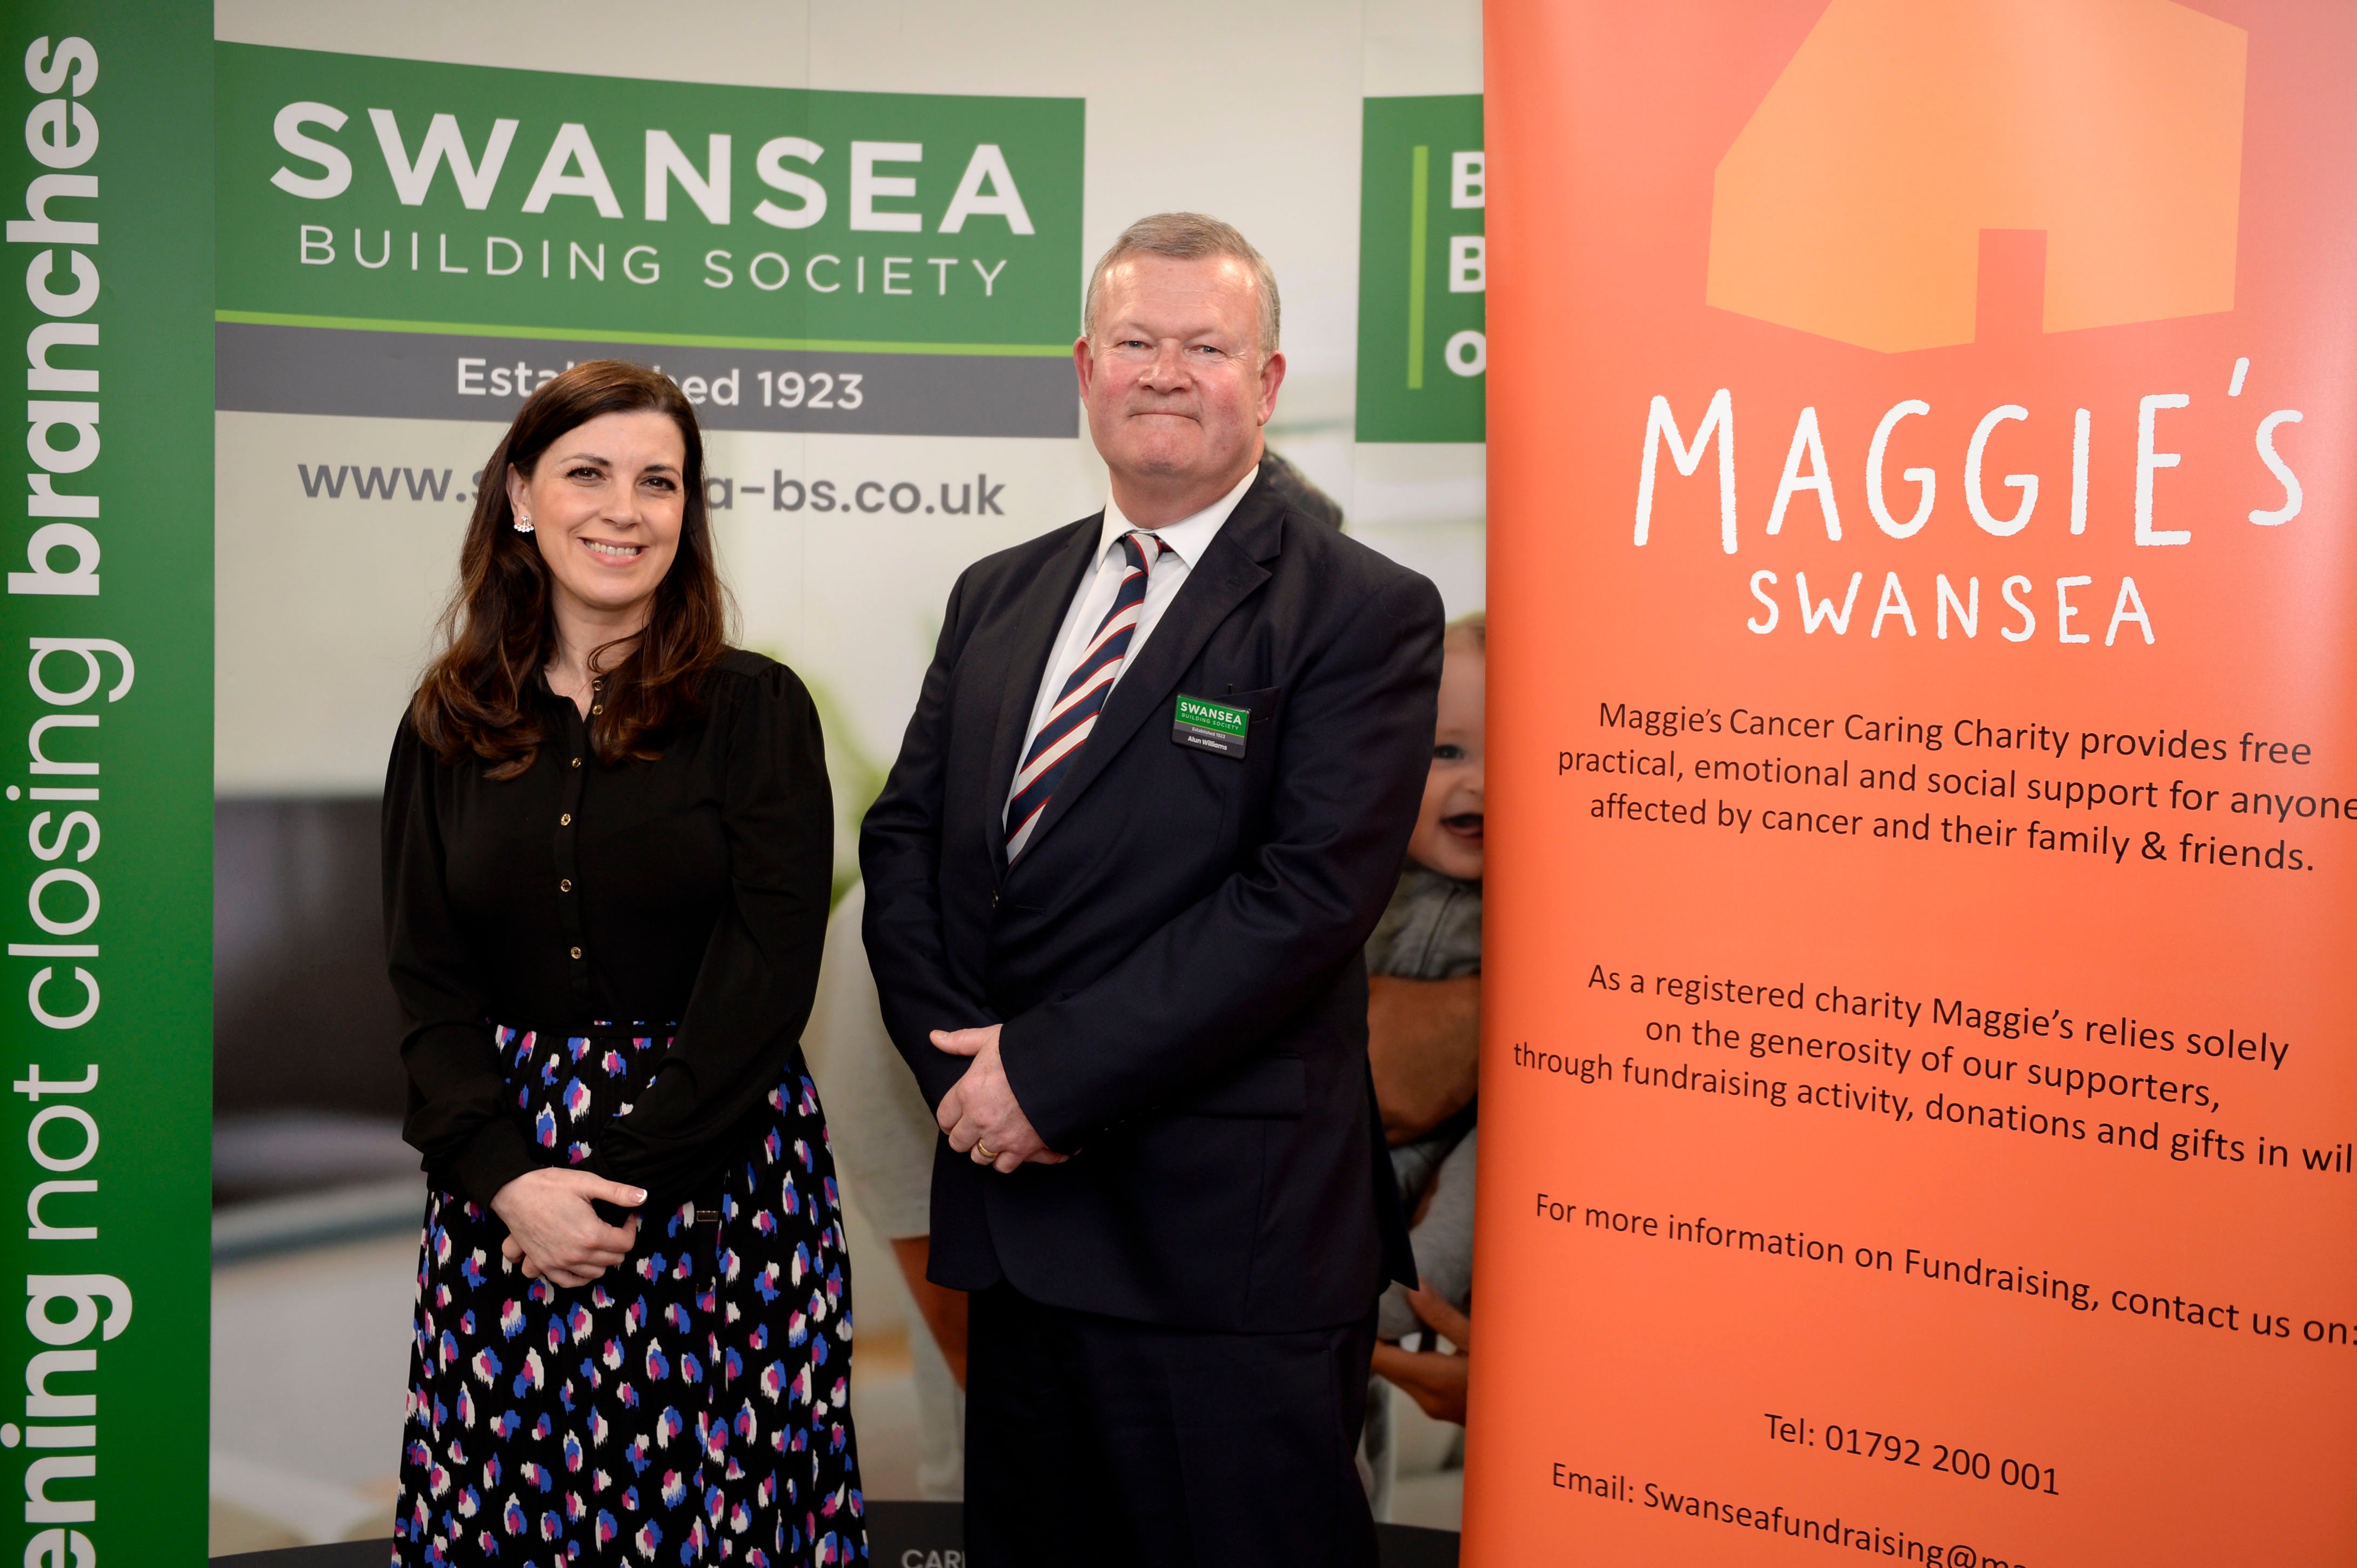 Proud to renew our commitment to Maggie's Swansea for third consecutive year